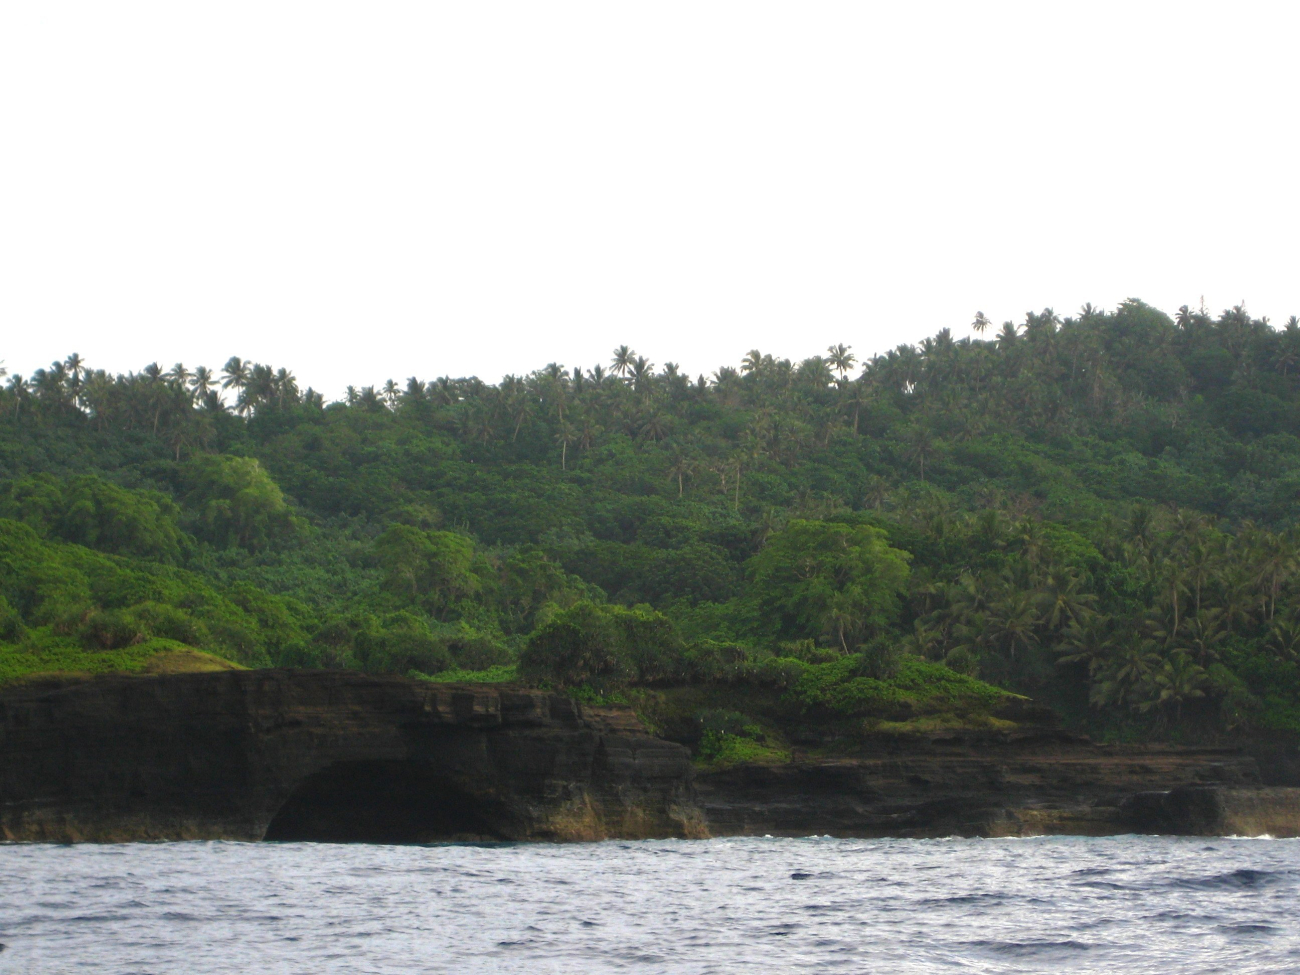 Lush vegetation above sea caves in the lava beds of American Samoa